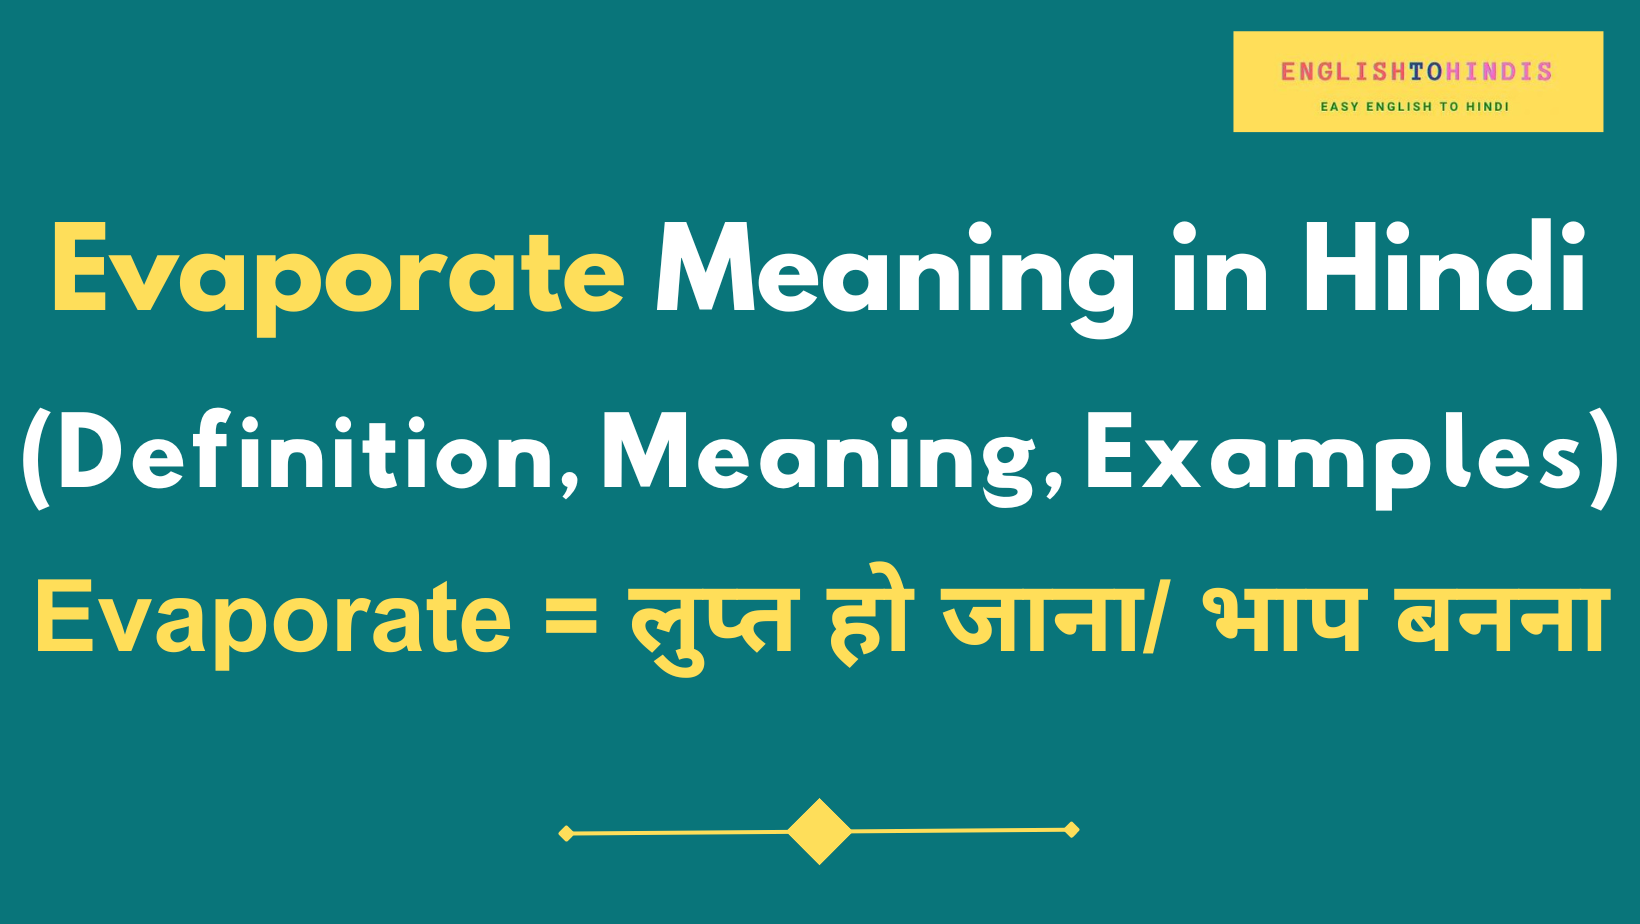 Evaporate Meaning in Hindi